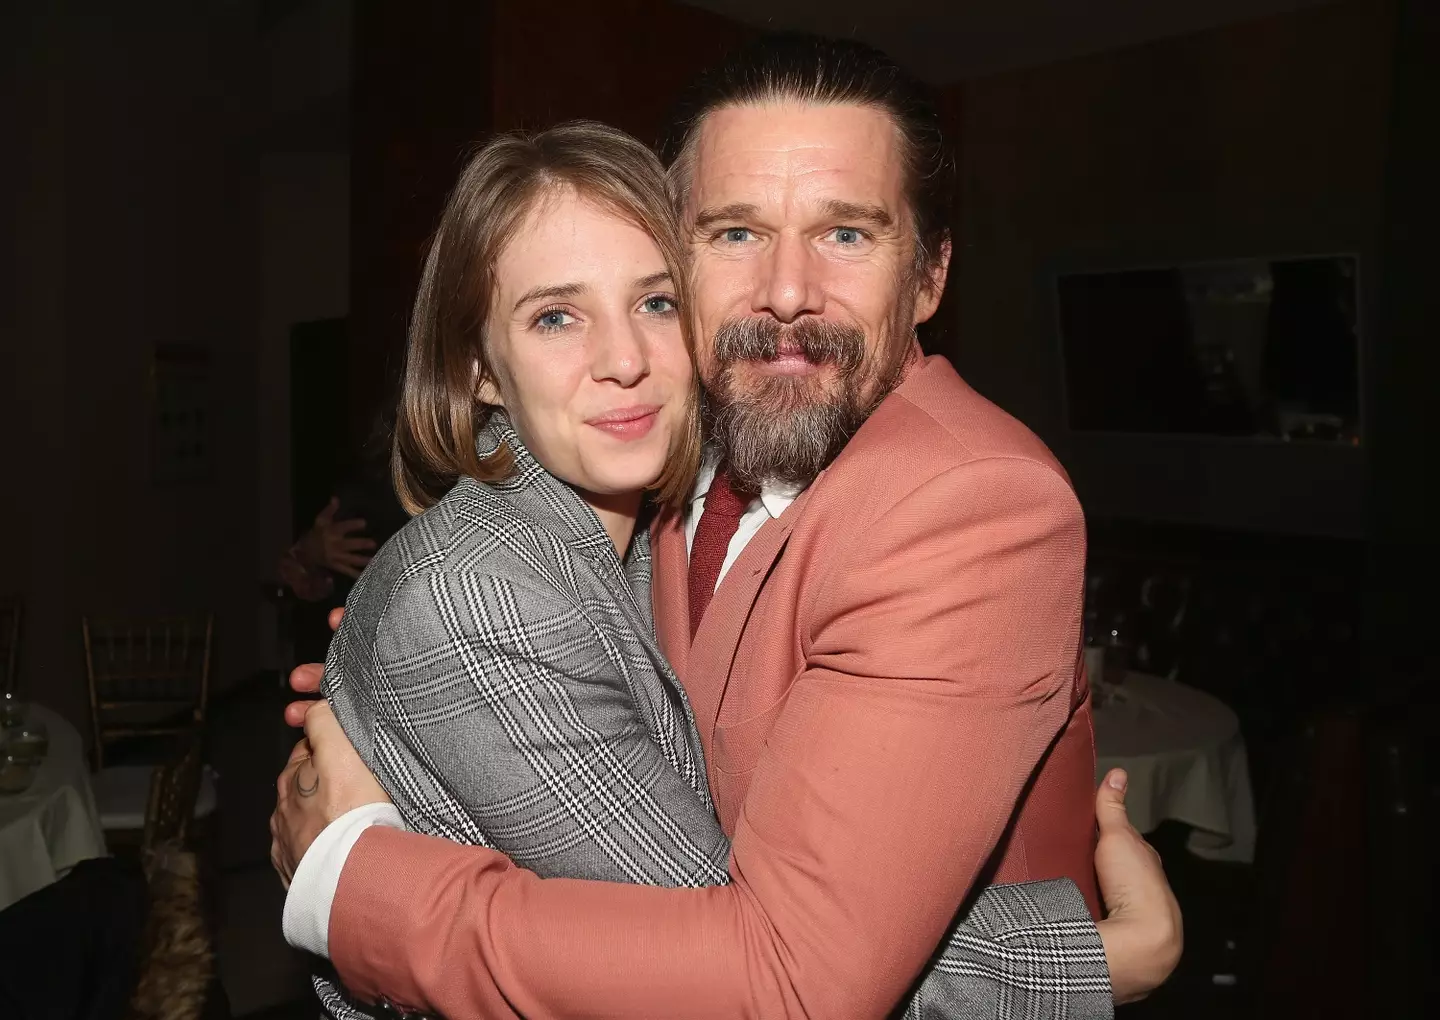 Ethan Hawke has responded to nepotism claims after casting his own daughter.